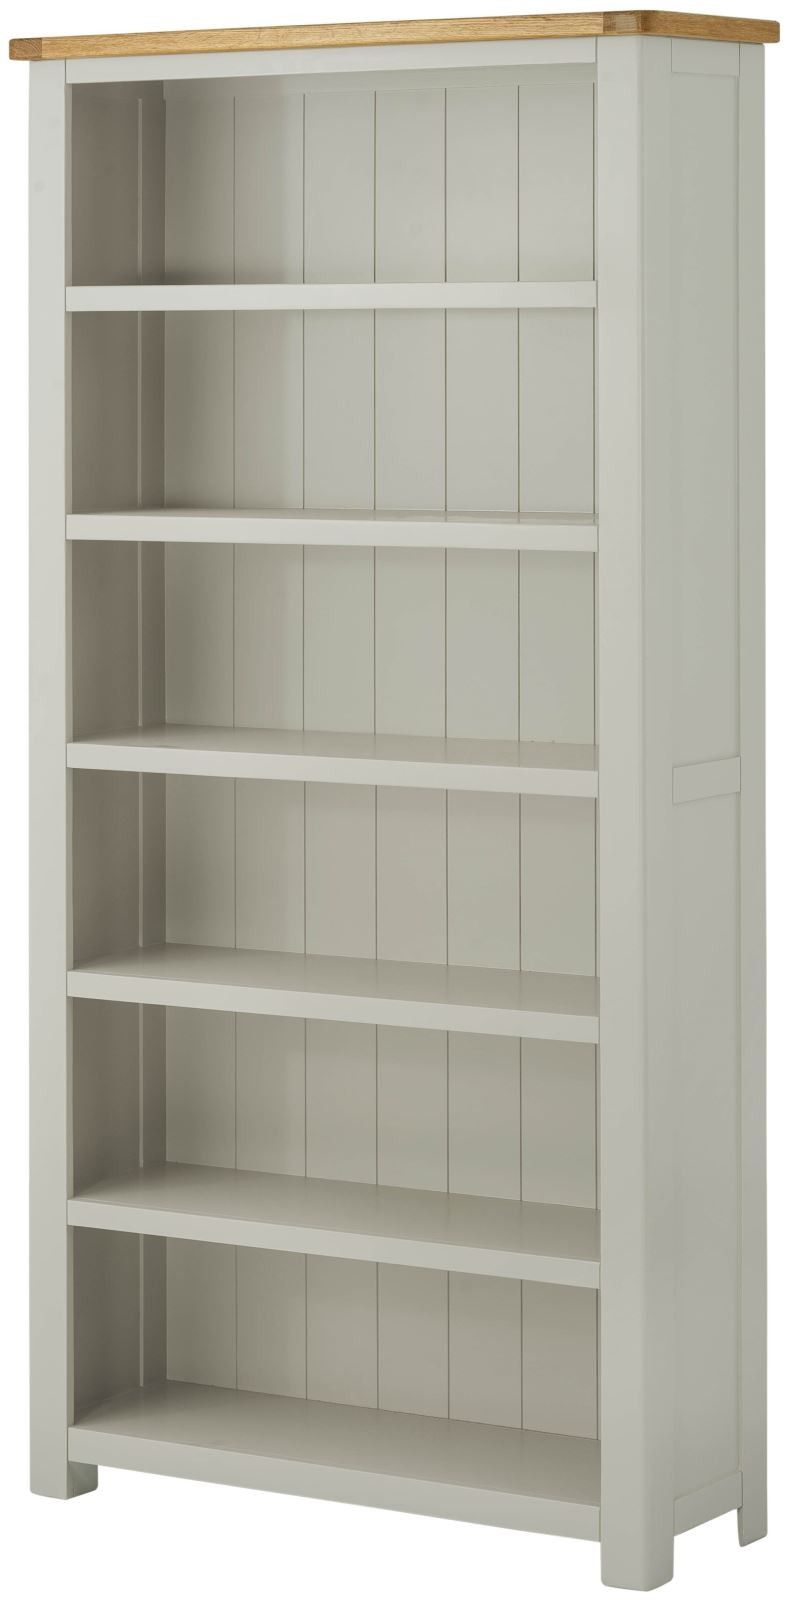 Purbeck Painted Large Bookcase